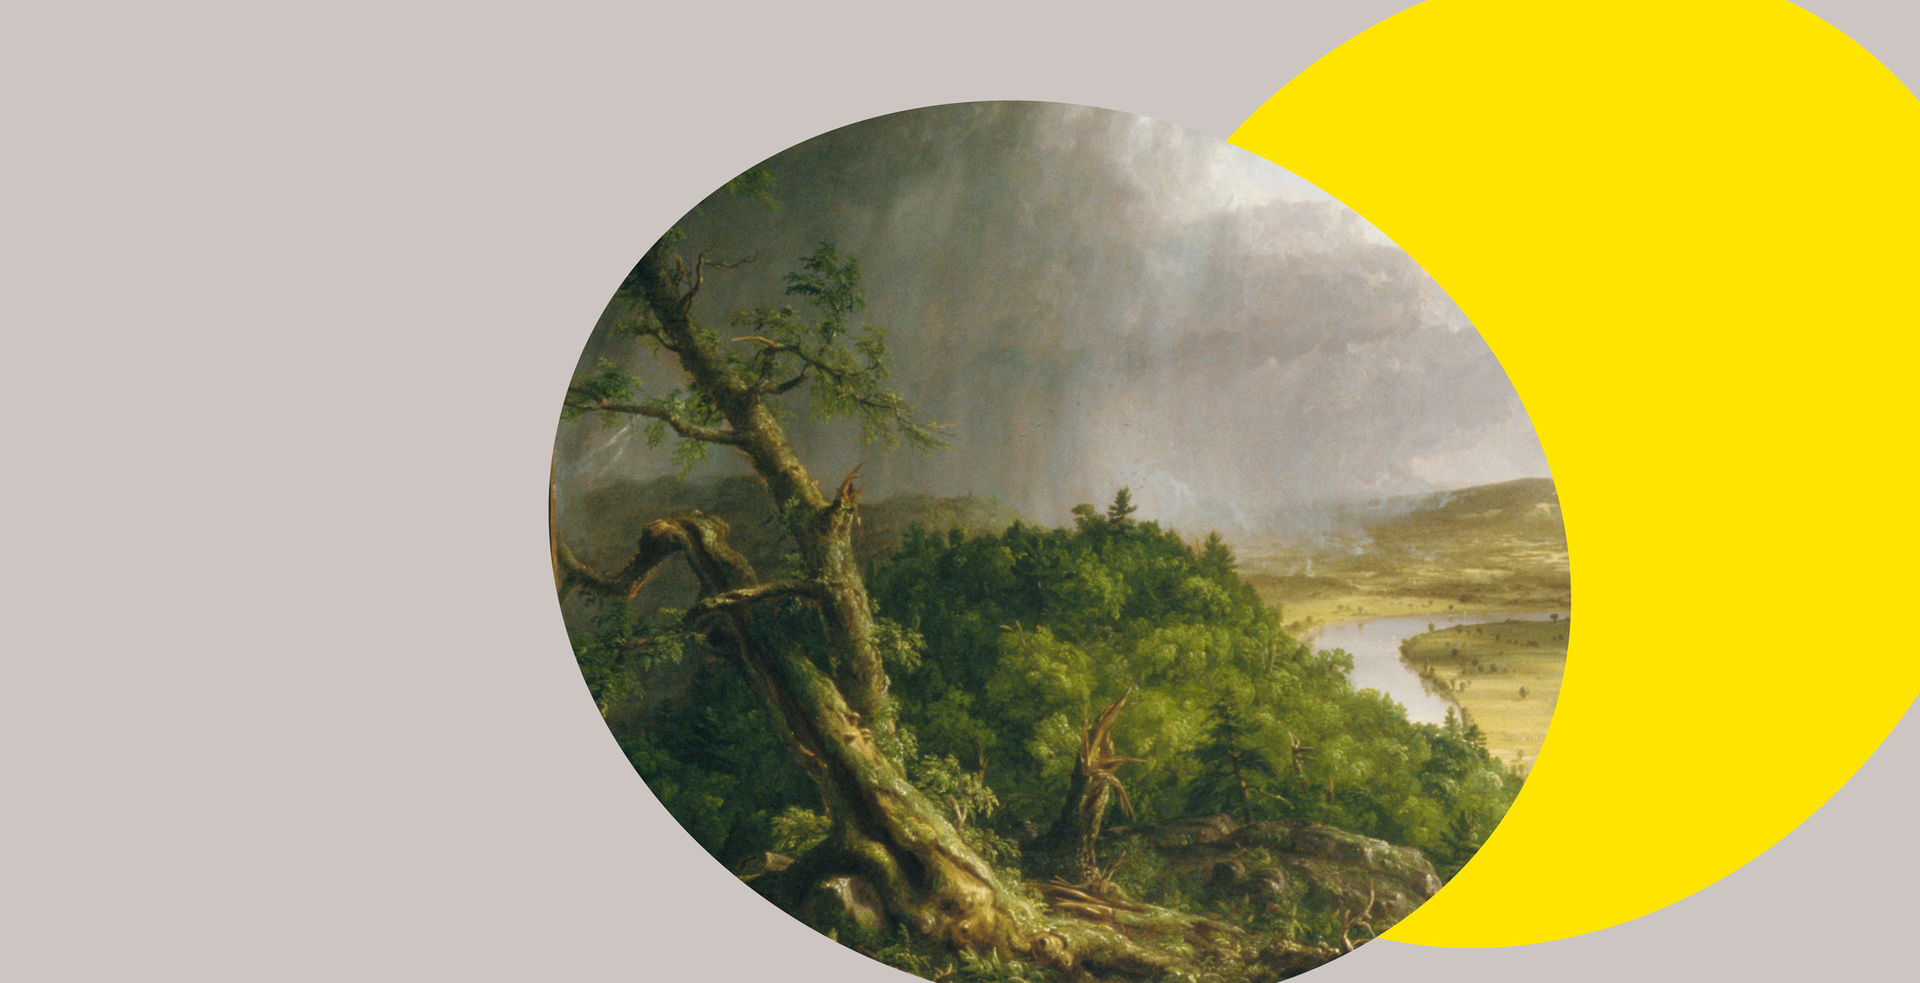 A detail from Thomas Cole's landscape painting "The Oxbow" set against a bright yellow ovular spotlight shape in the background.